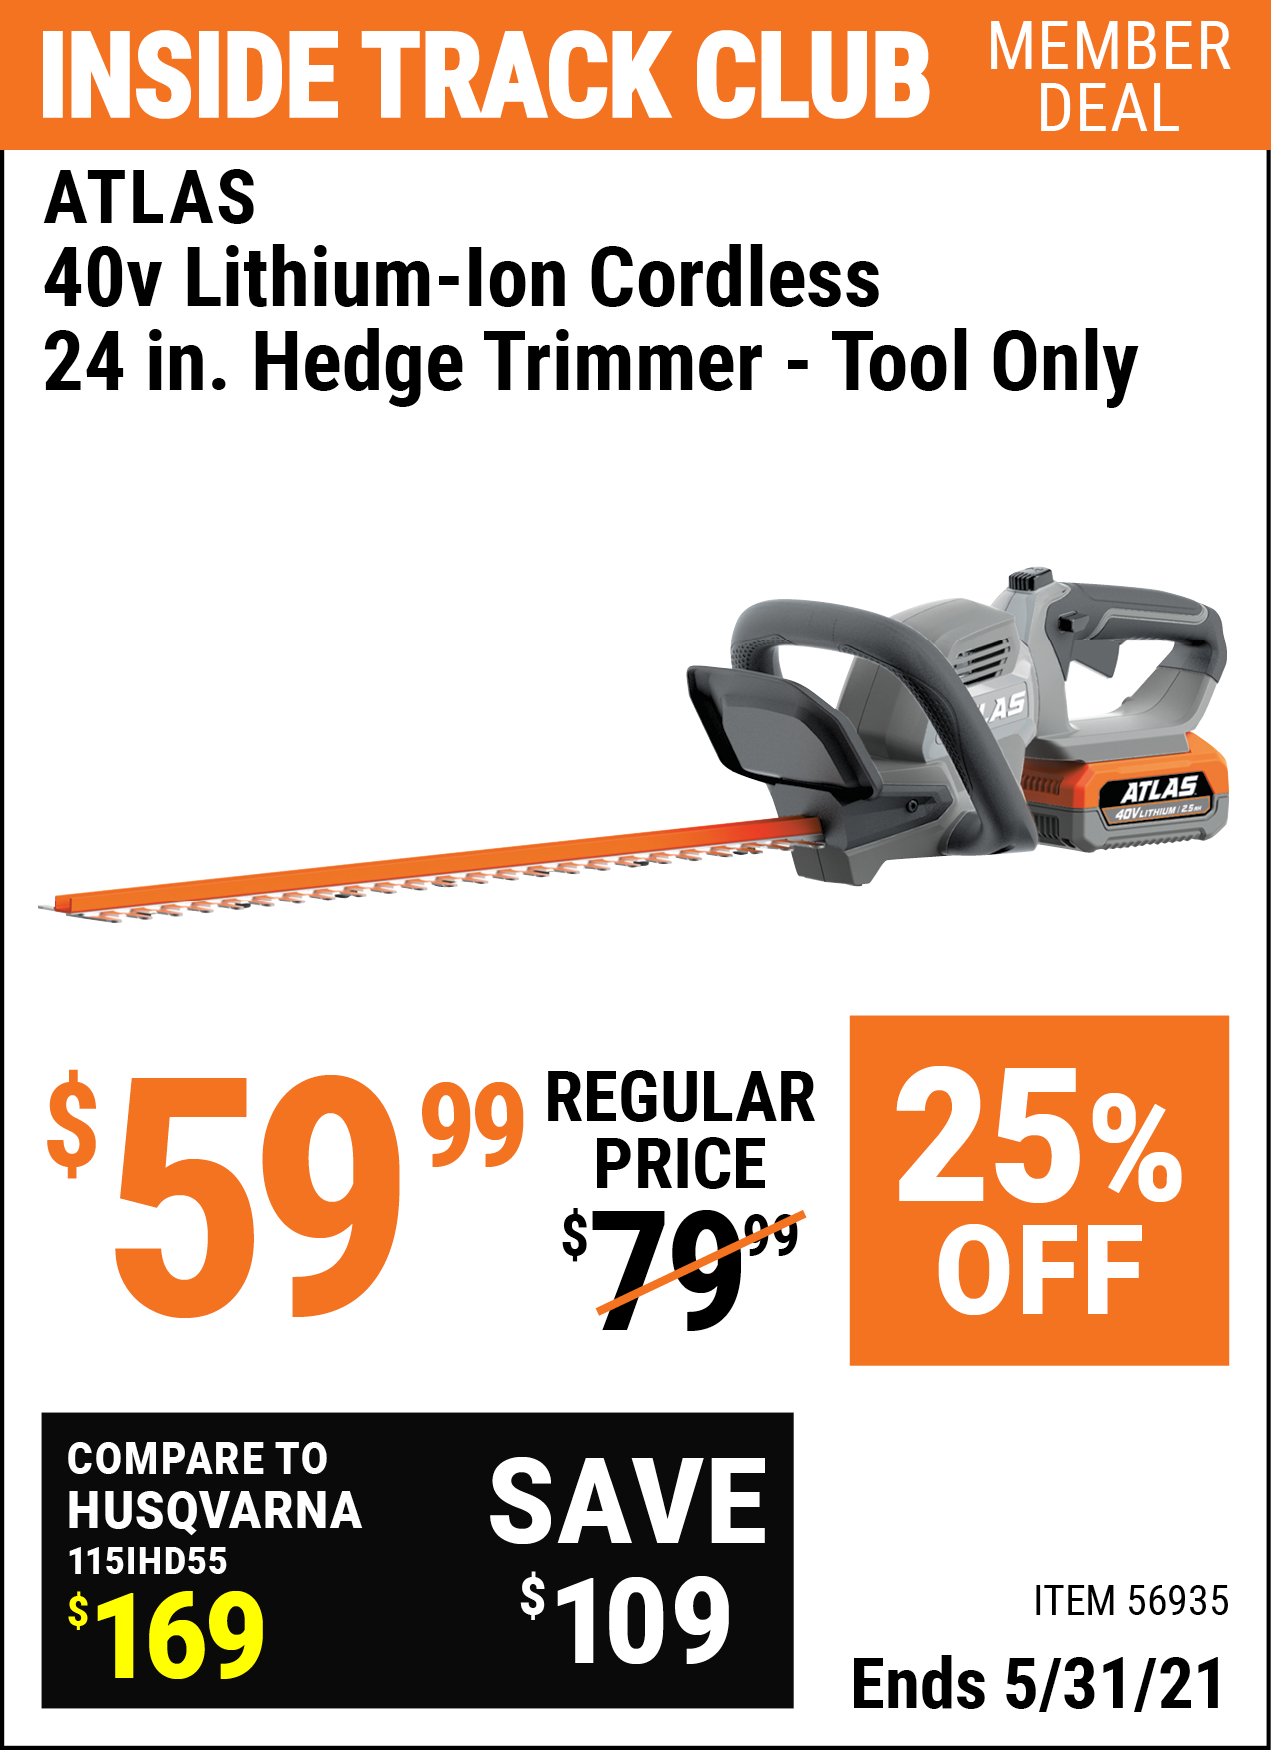 Inside Track Club members can buy the ATLAS 40v Lithium-Ion Cordless 24 In. Hedge Trimmer- Tool Only (Item 56935) for $59.99, valid through 5/31/2021.